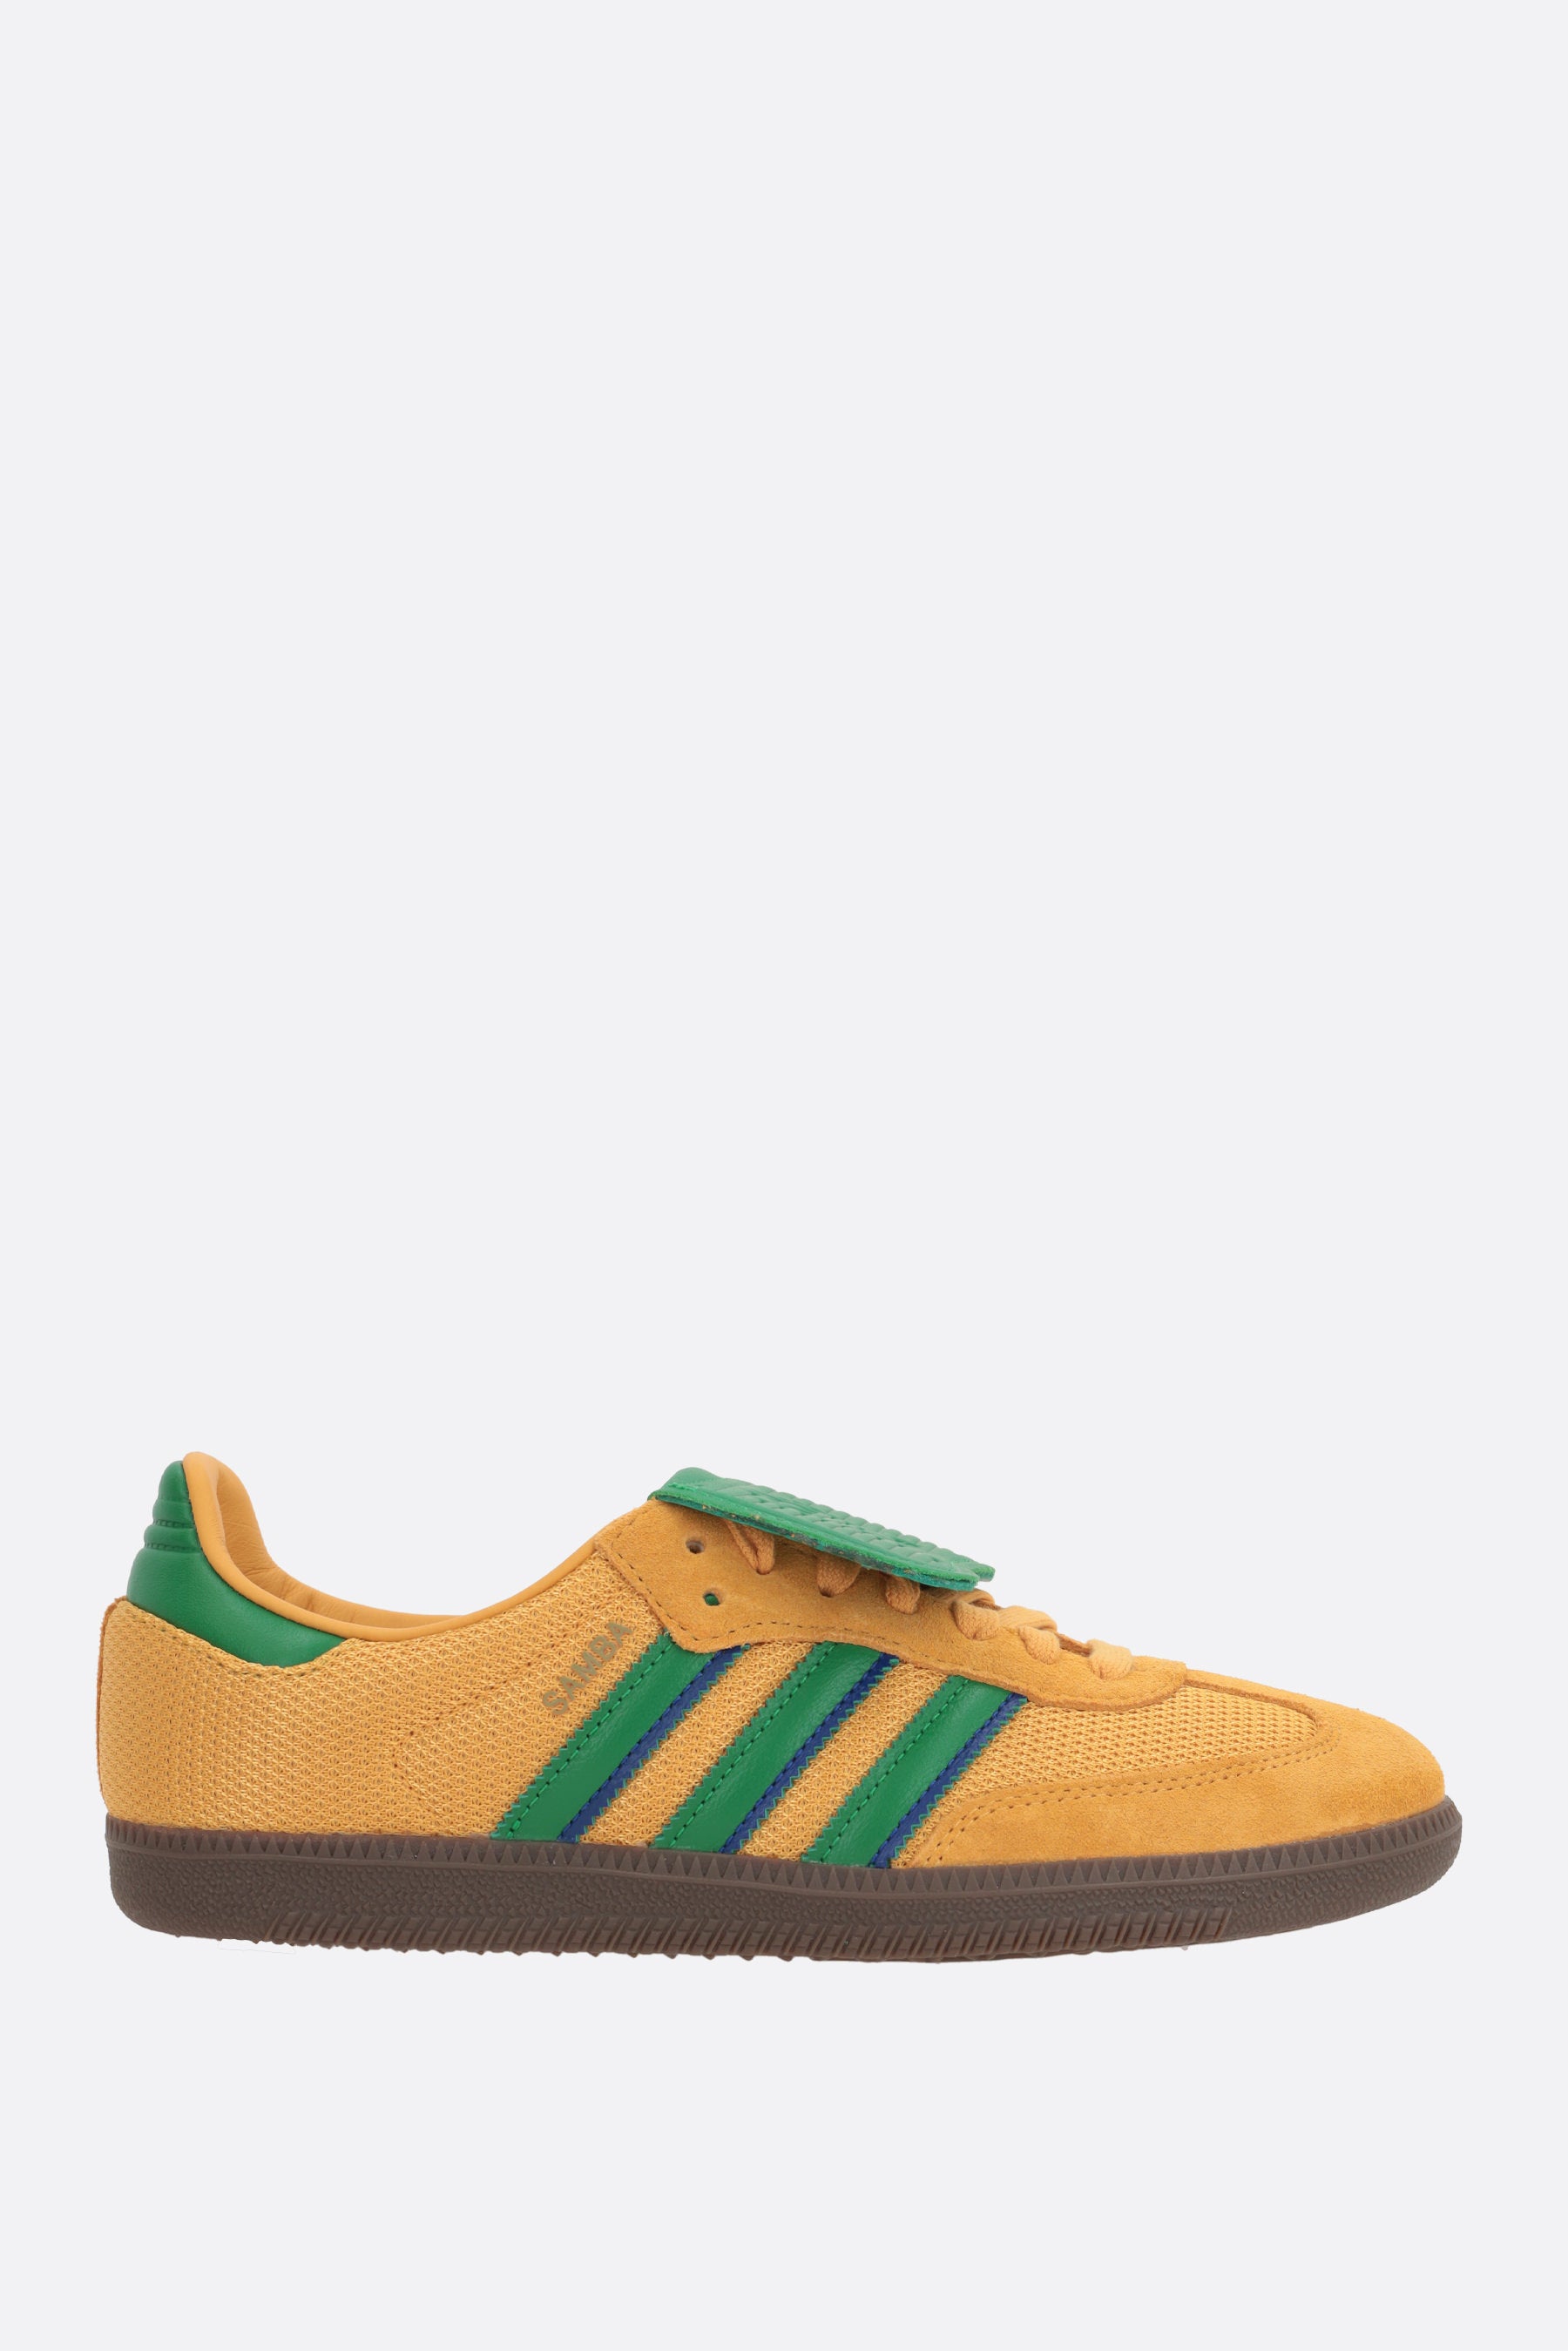 Samba LT mesh and suede sneakers